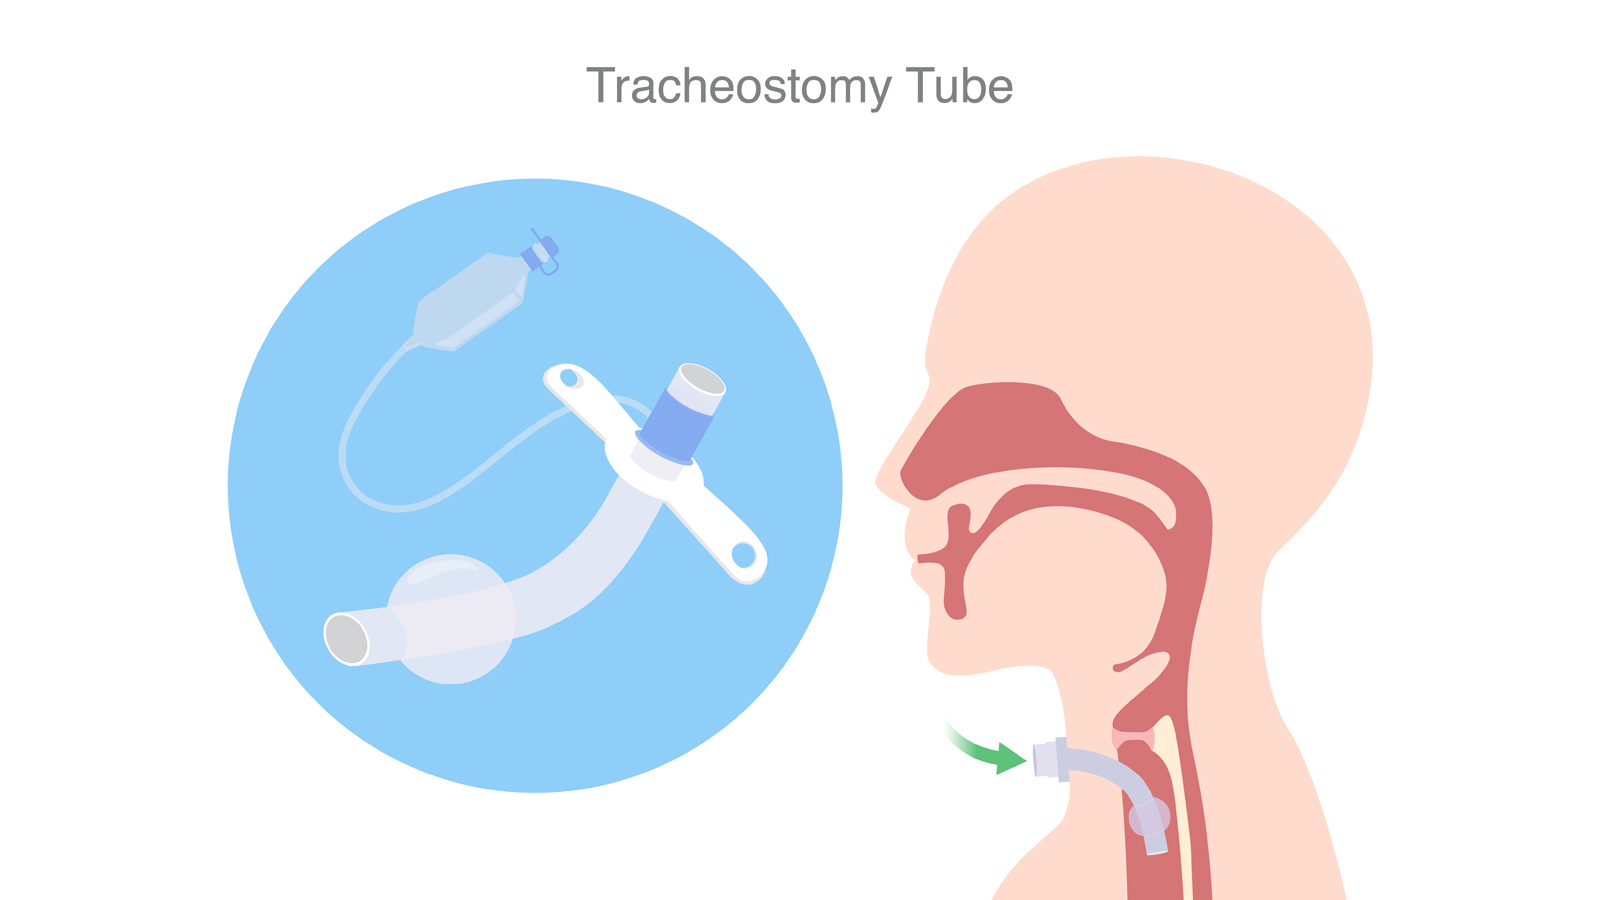 Diagram of a tracheostomy tube in a patient.